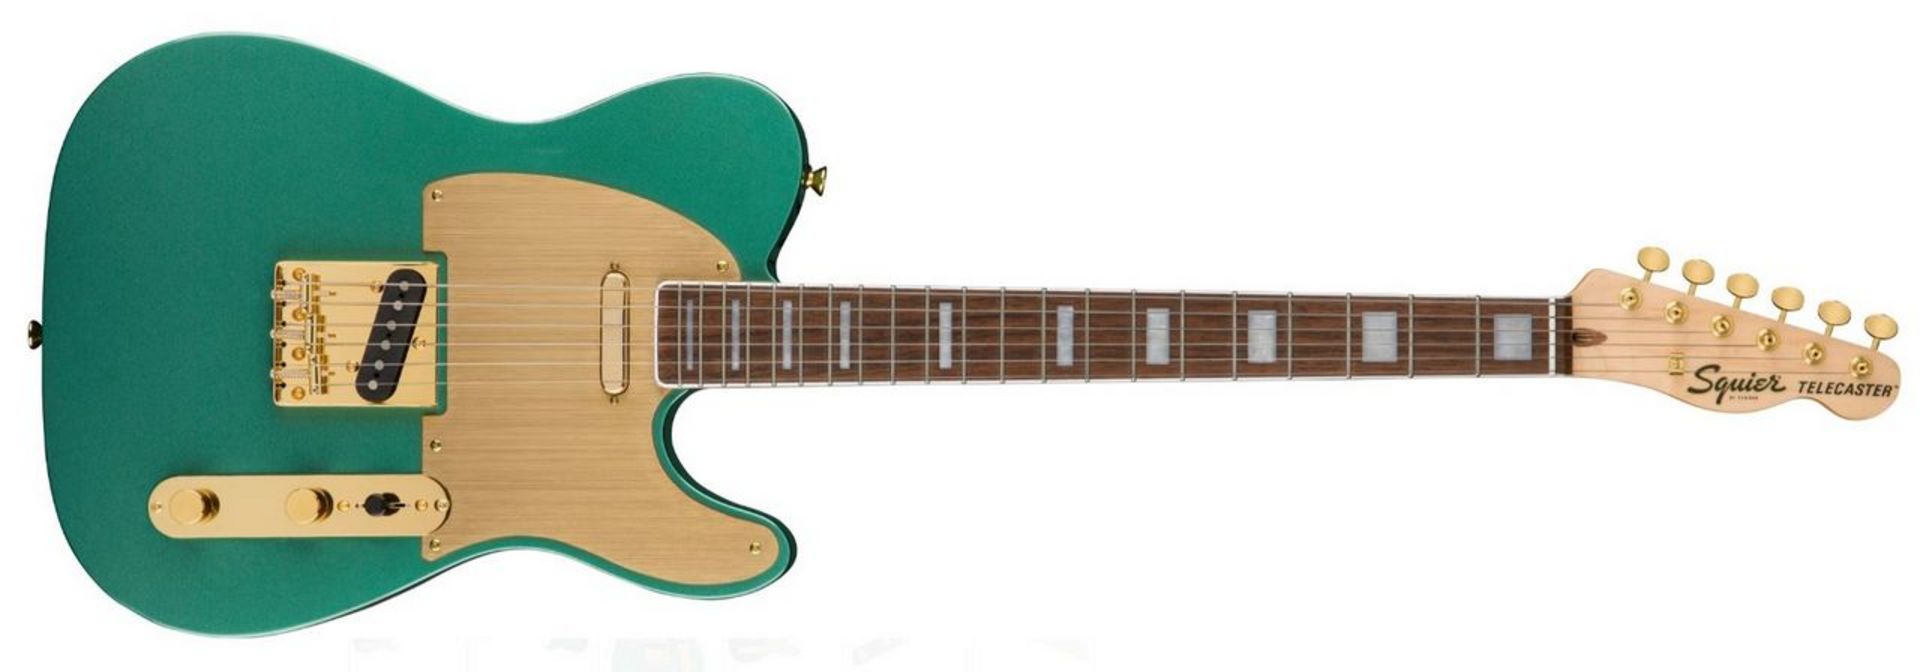 Fender Squier - 40TH ANNIVERSARY TELECASTER GOLD EDITION Sherwood Green